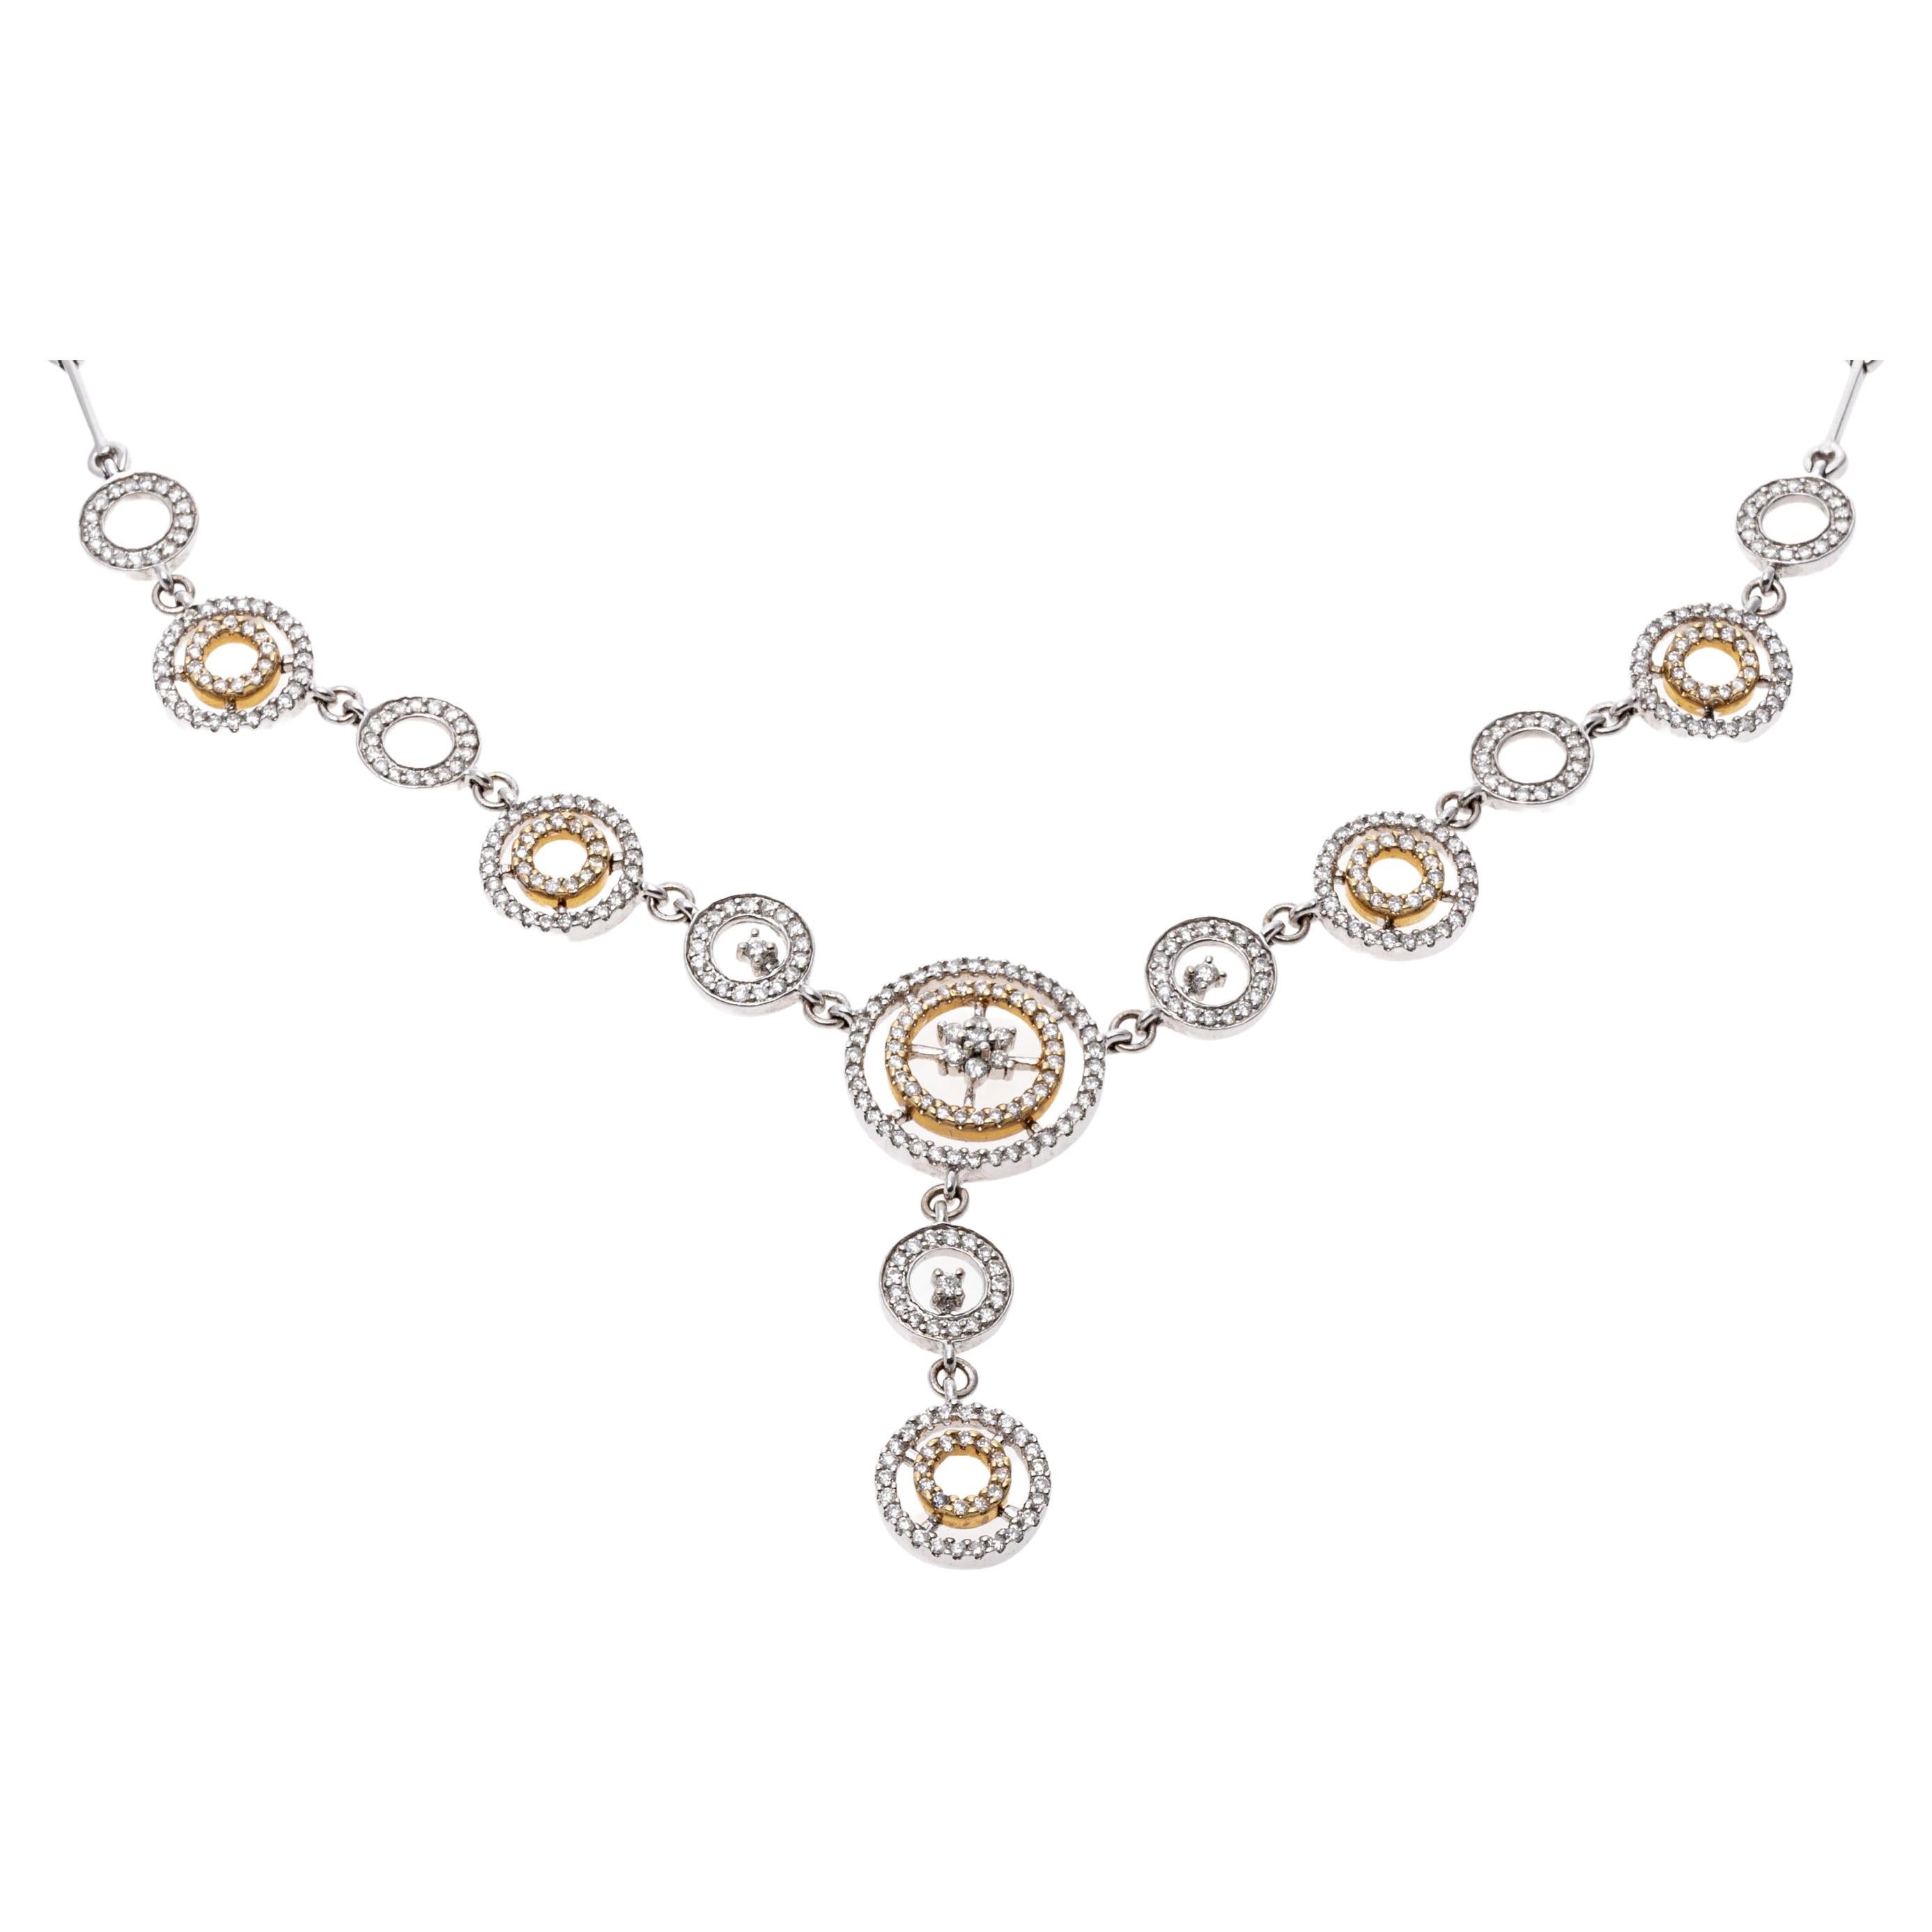 14K White and Yellow Gold Diamond Circle Link "Y" Necklace, App. 2.10 TCW